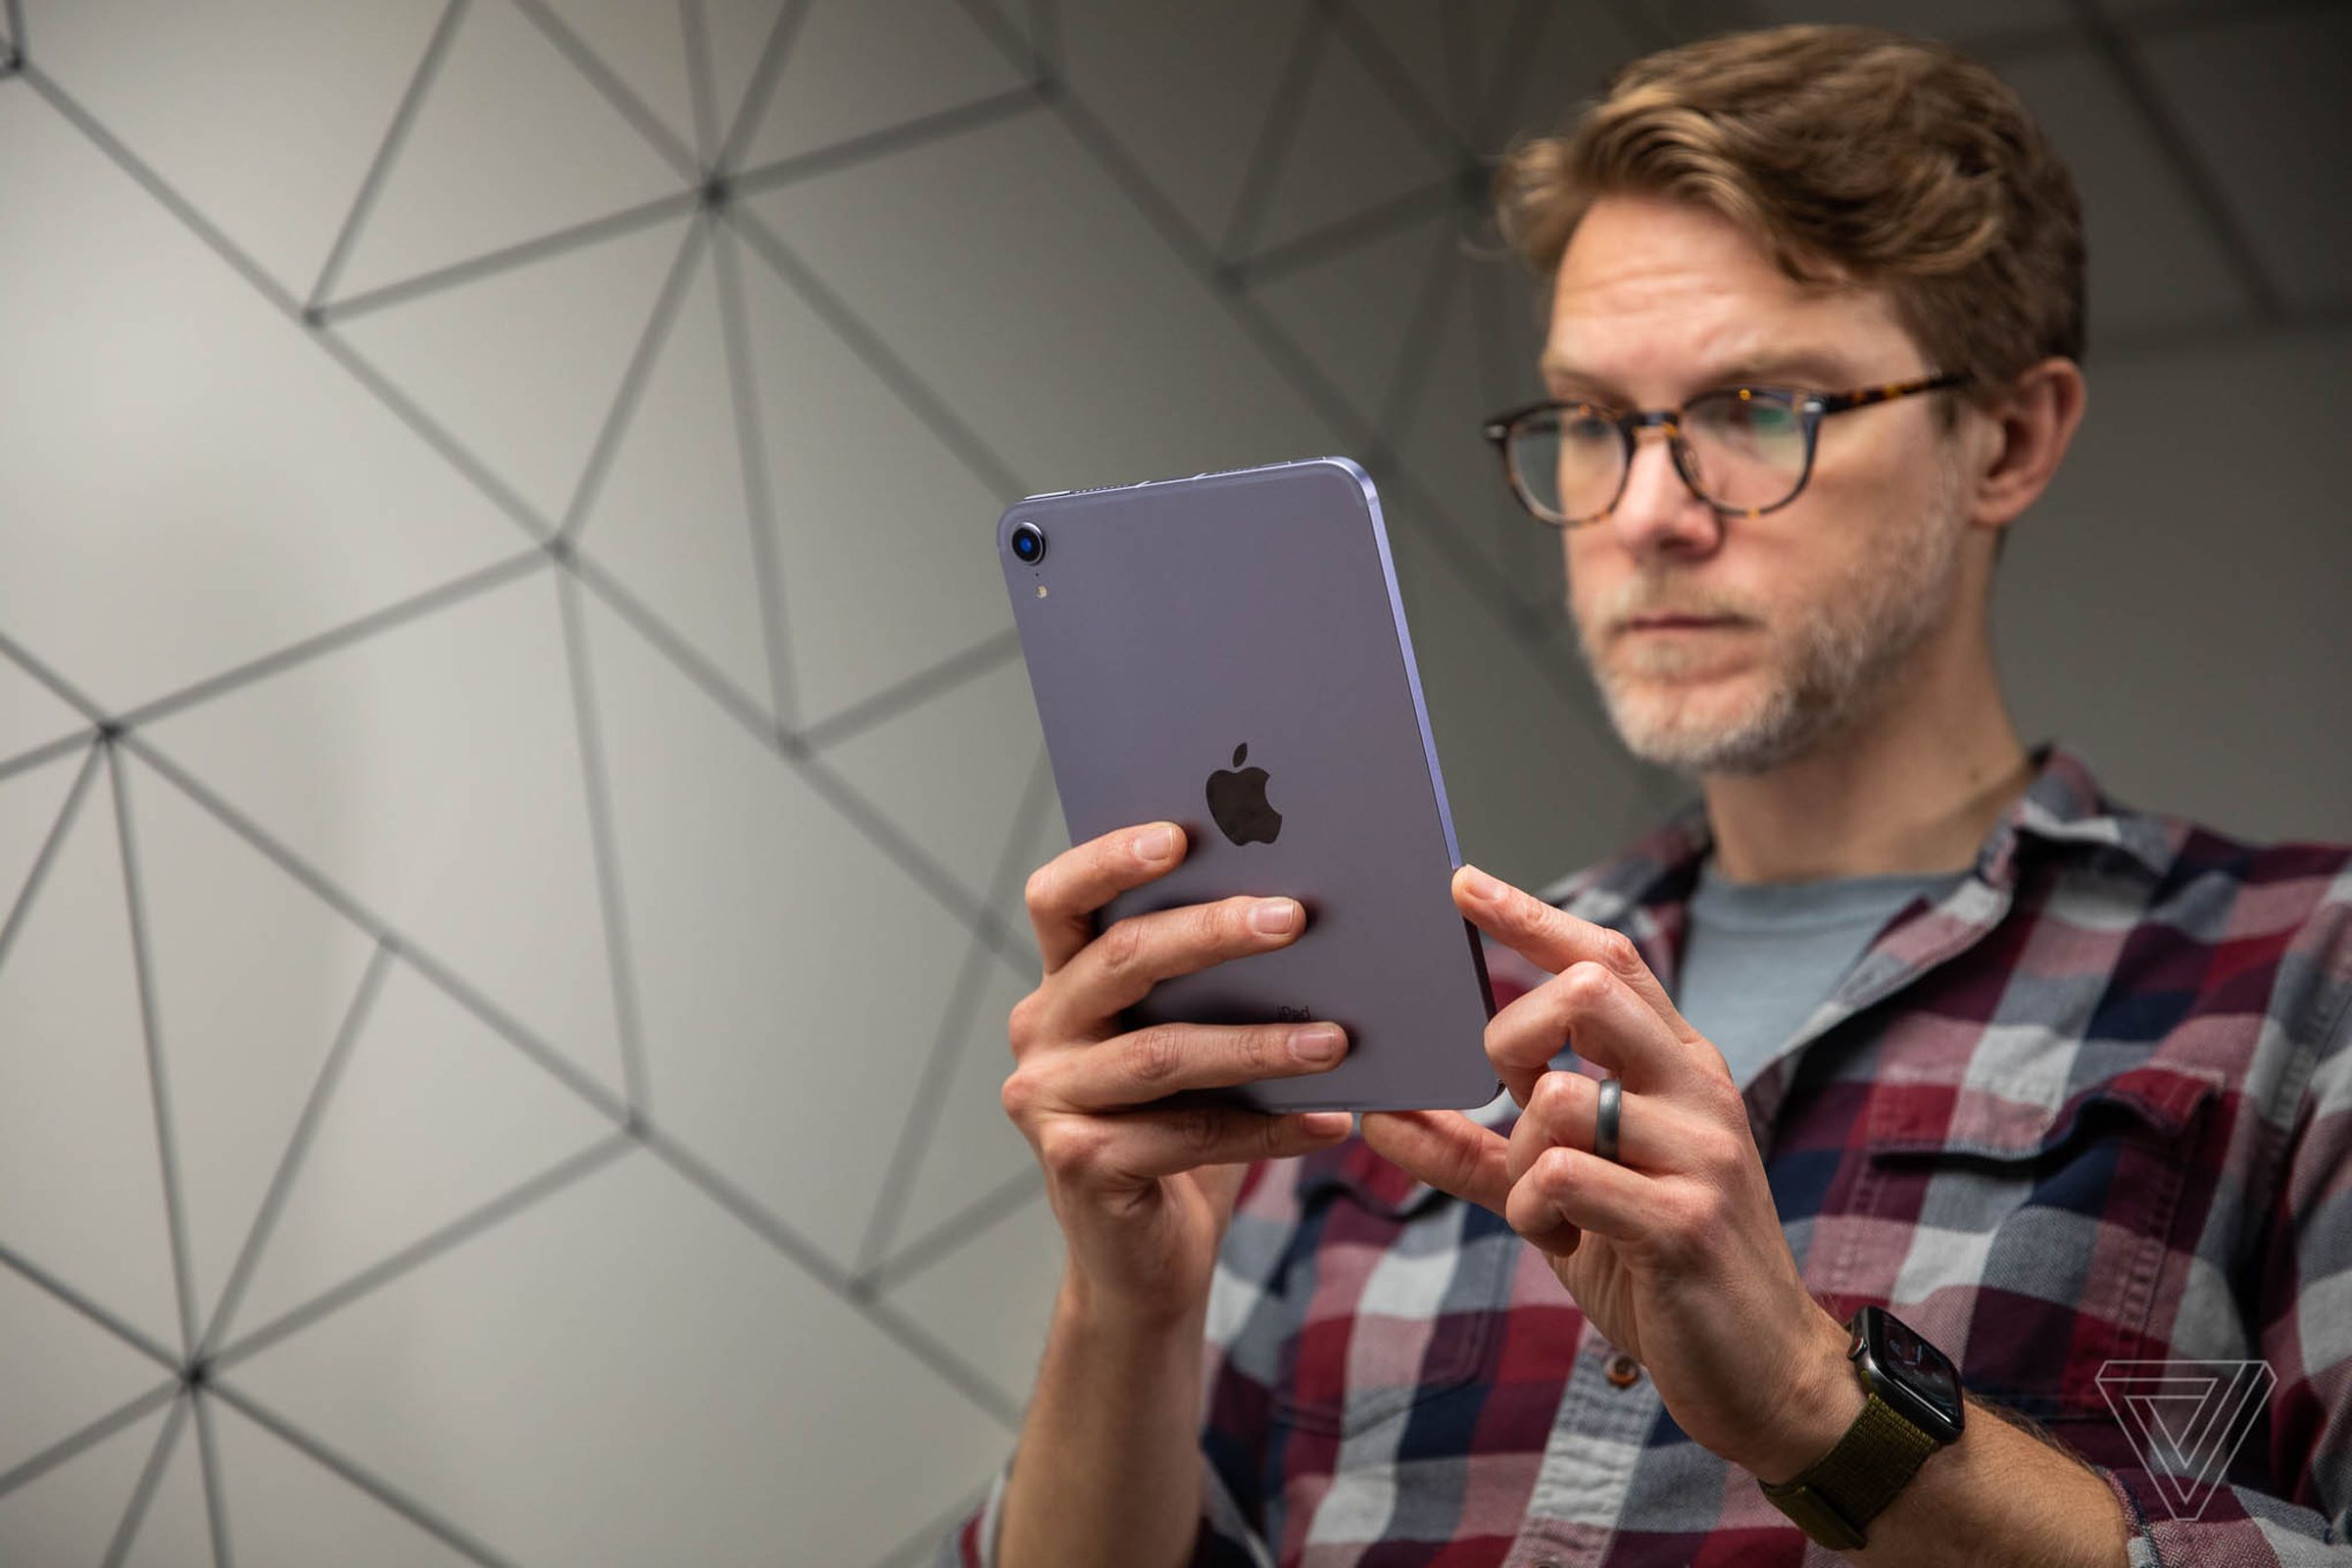 A man holding a purple iPad Mini and looking at the screen